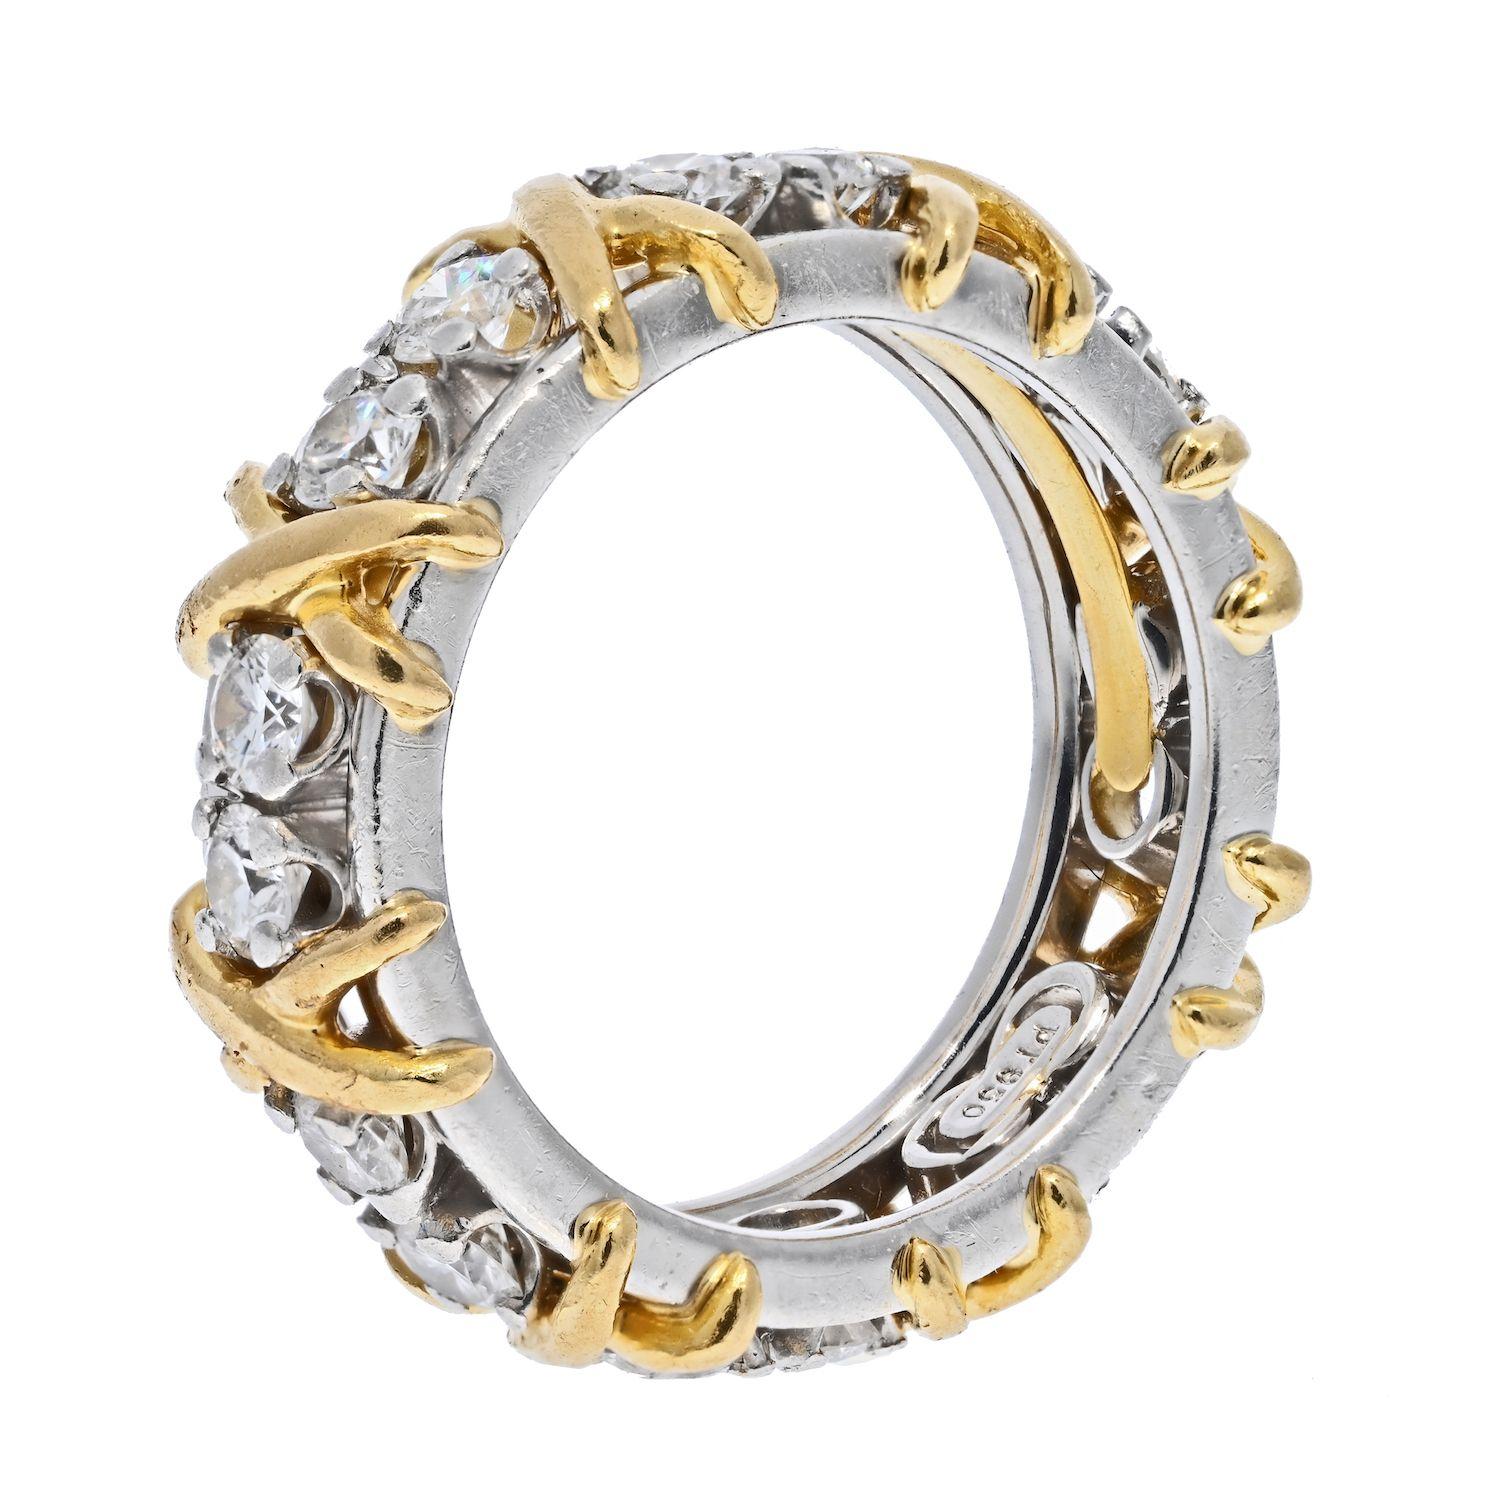 The classic from Schlumberger collection of rings ever made comes this sixteen stone ring. Crafted in platinum and yellow gold with the best quality diamonds of 1.14cts in total you will love this ring to be worn out and about. 
Jean Schlumberger’s